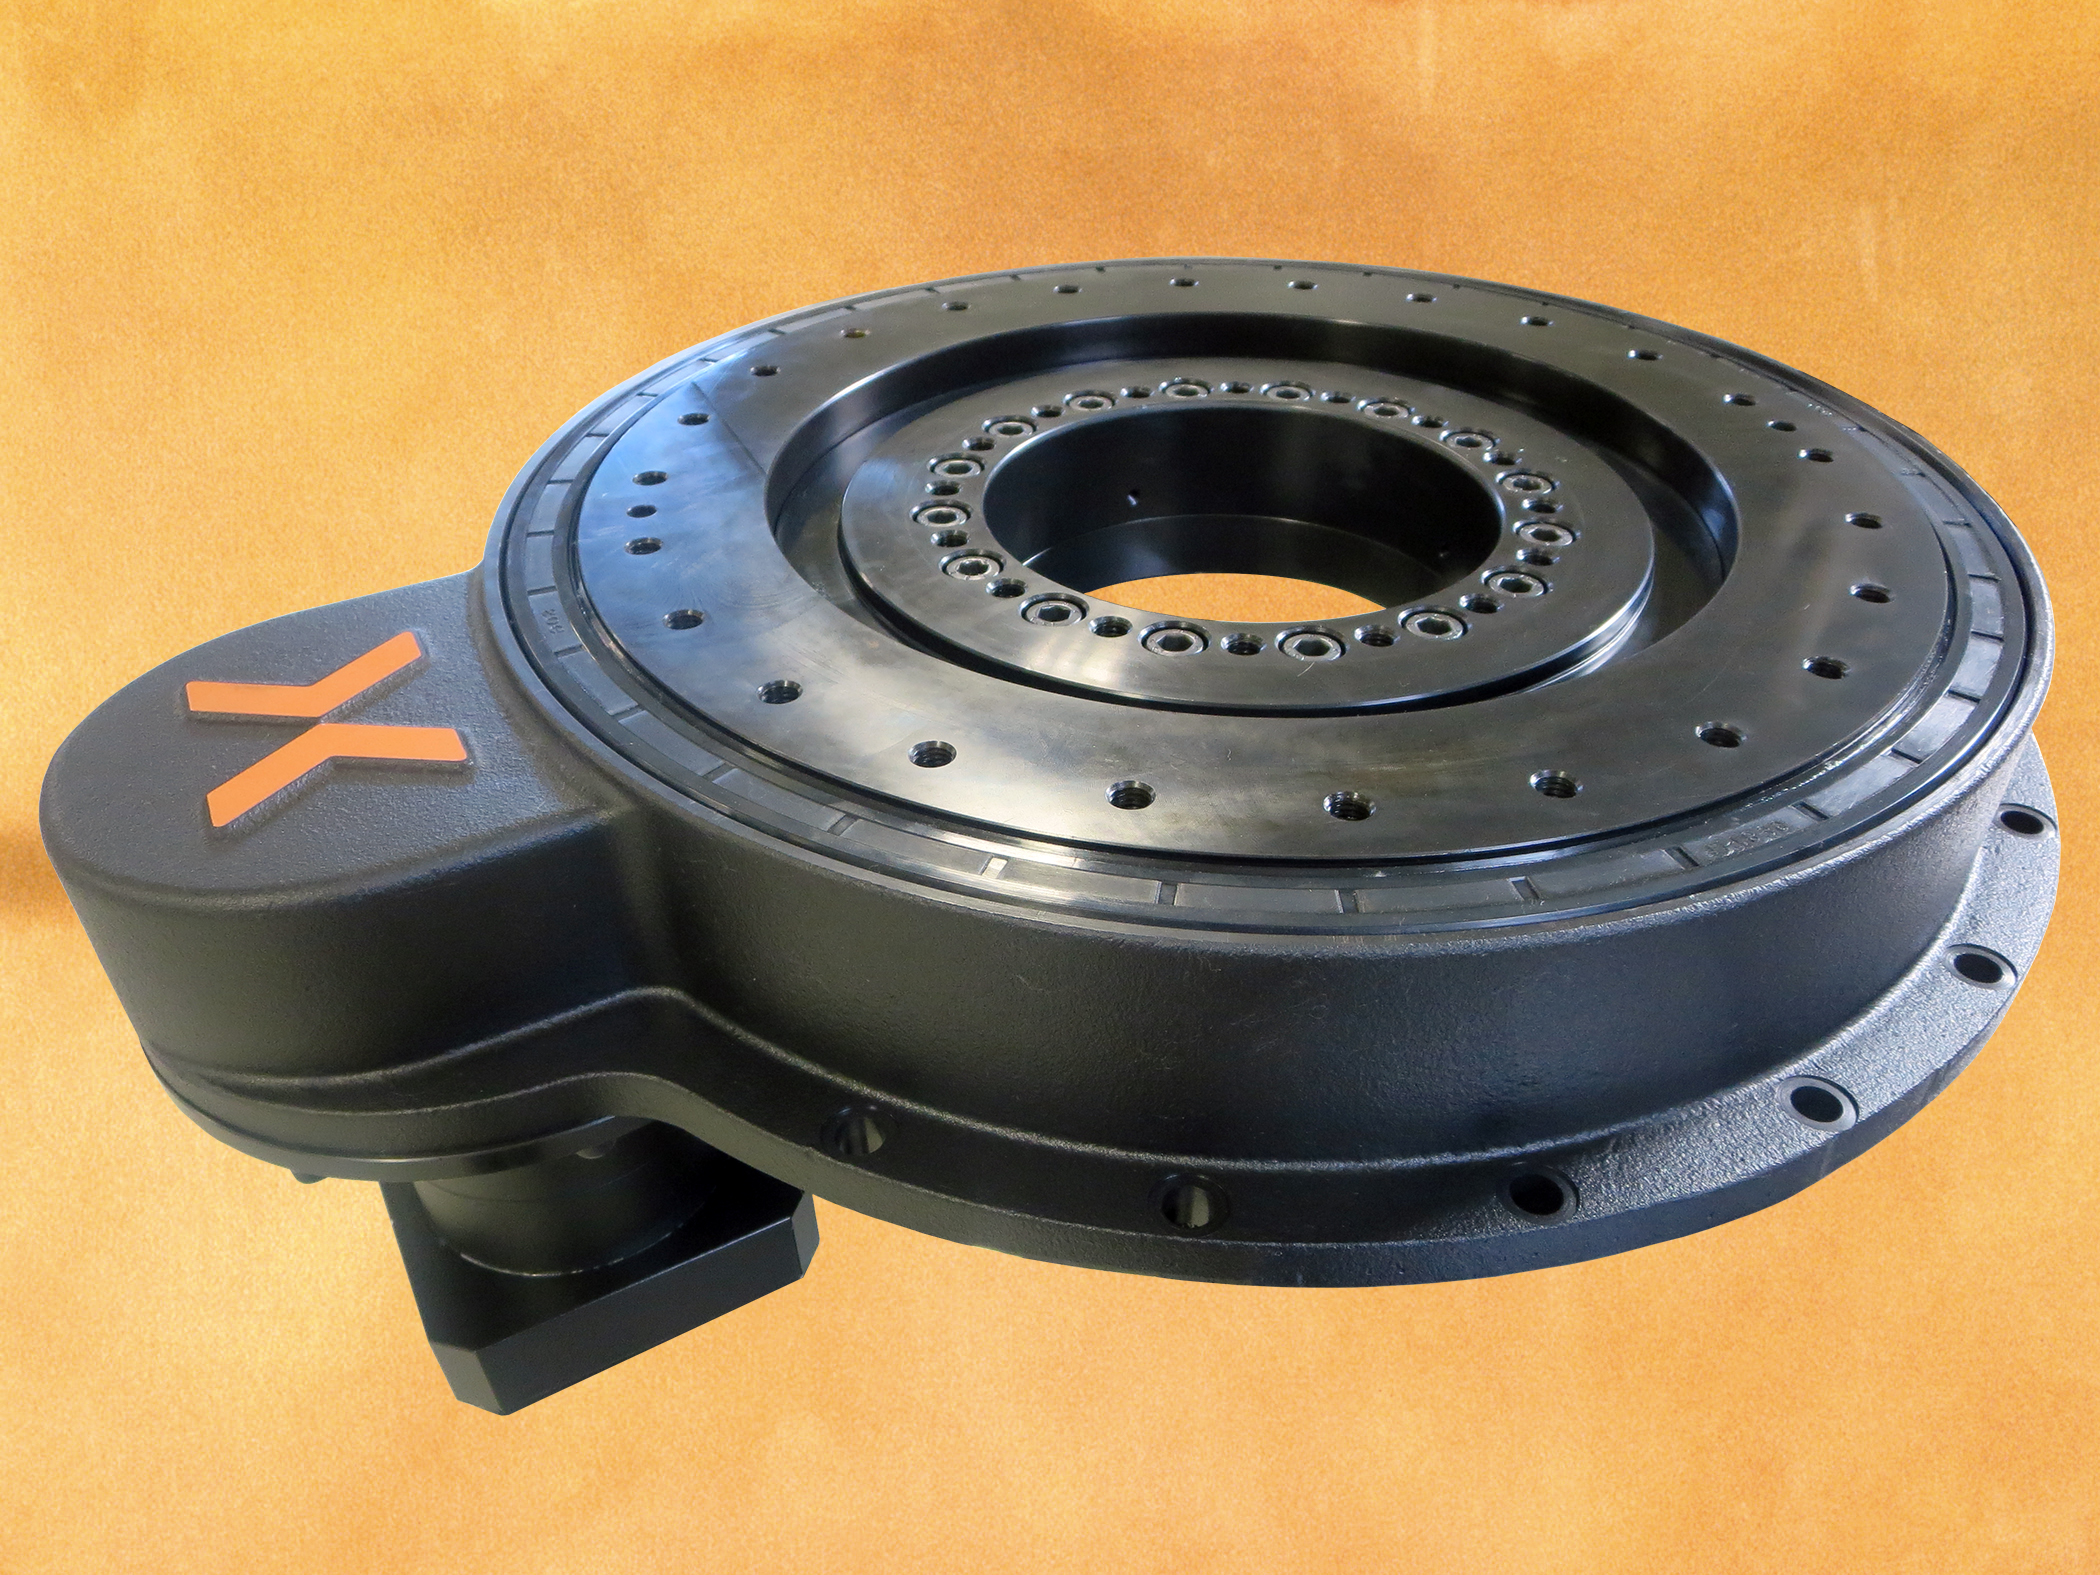 3203 Series Rotary Motion Precision. Диск Motion x2. Ve4548 Ring, Drive. Transmission of Rotary Motion. Rang drive